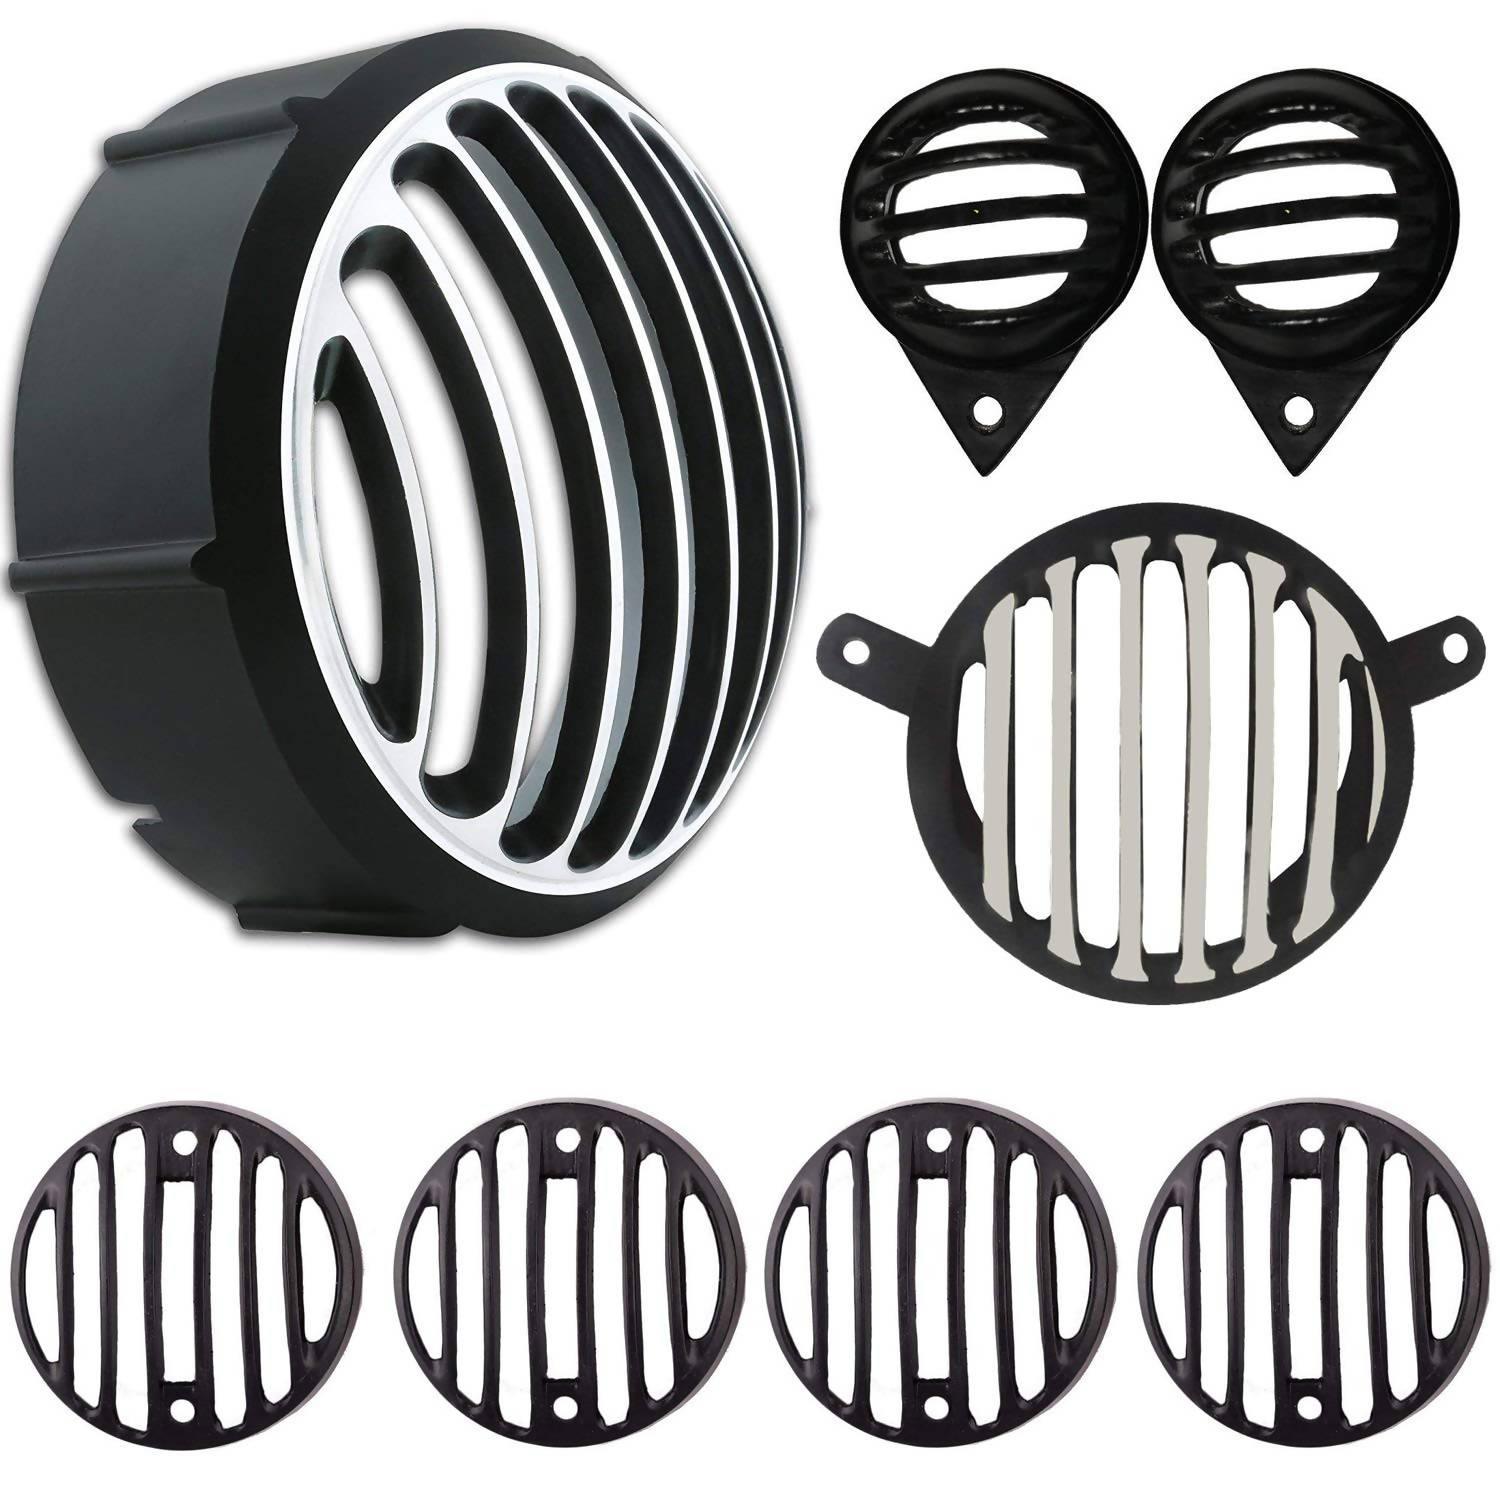 Motocare metal headlight grill protector For Royal Enfield Classic (Black and Chrome, Set of 8) - Autosparz